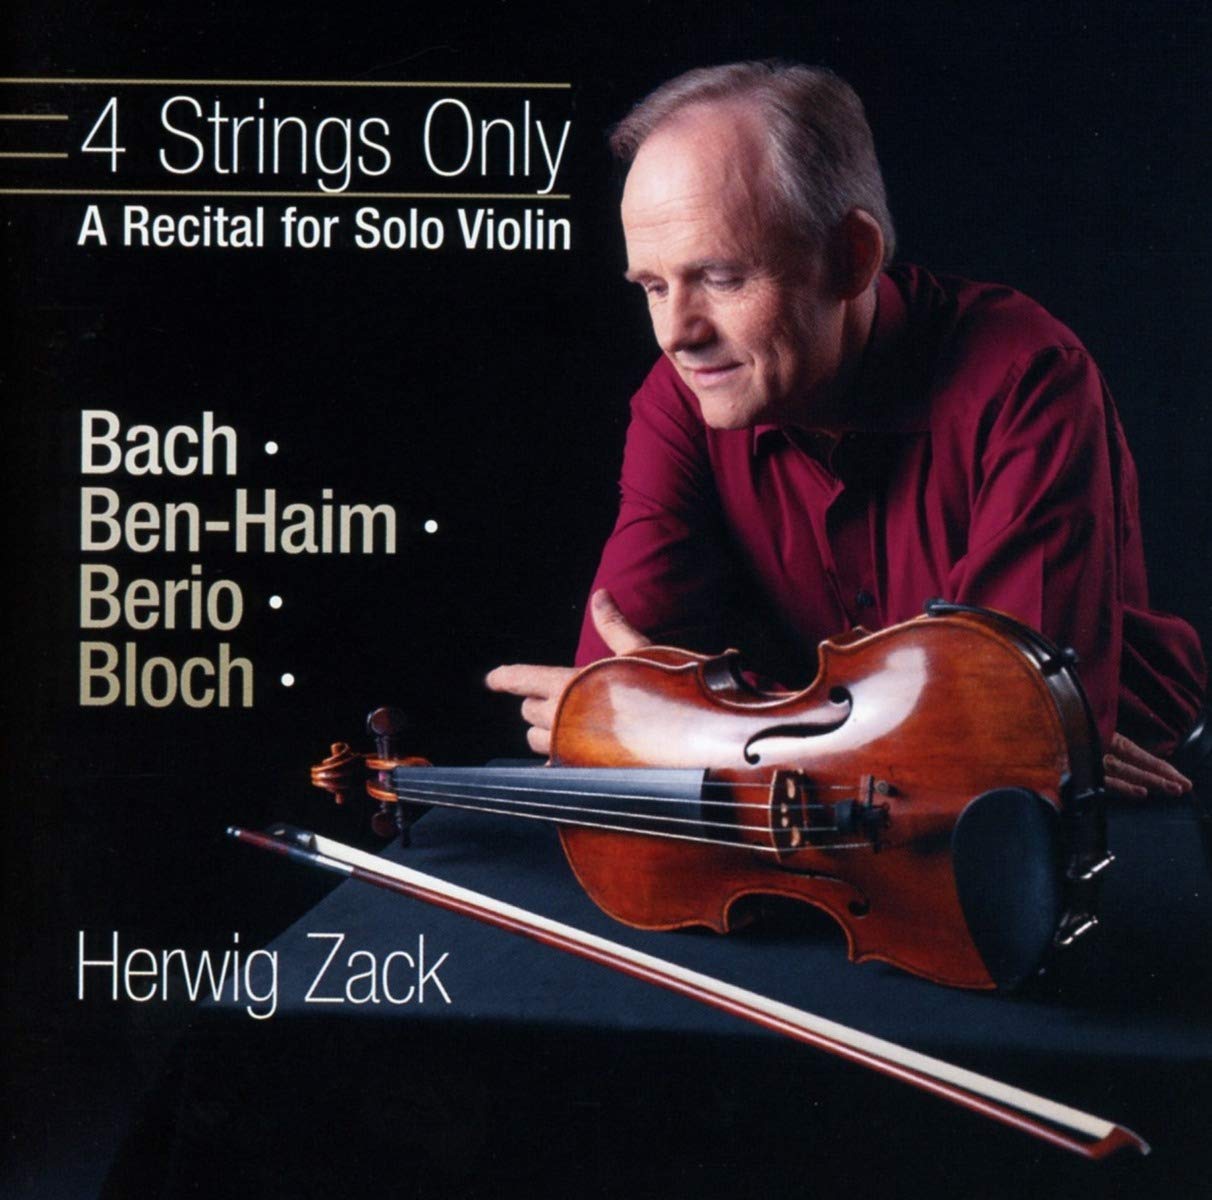 Four Strings Only: A Recital for Solo Violin - Herwig Zack